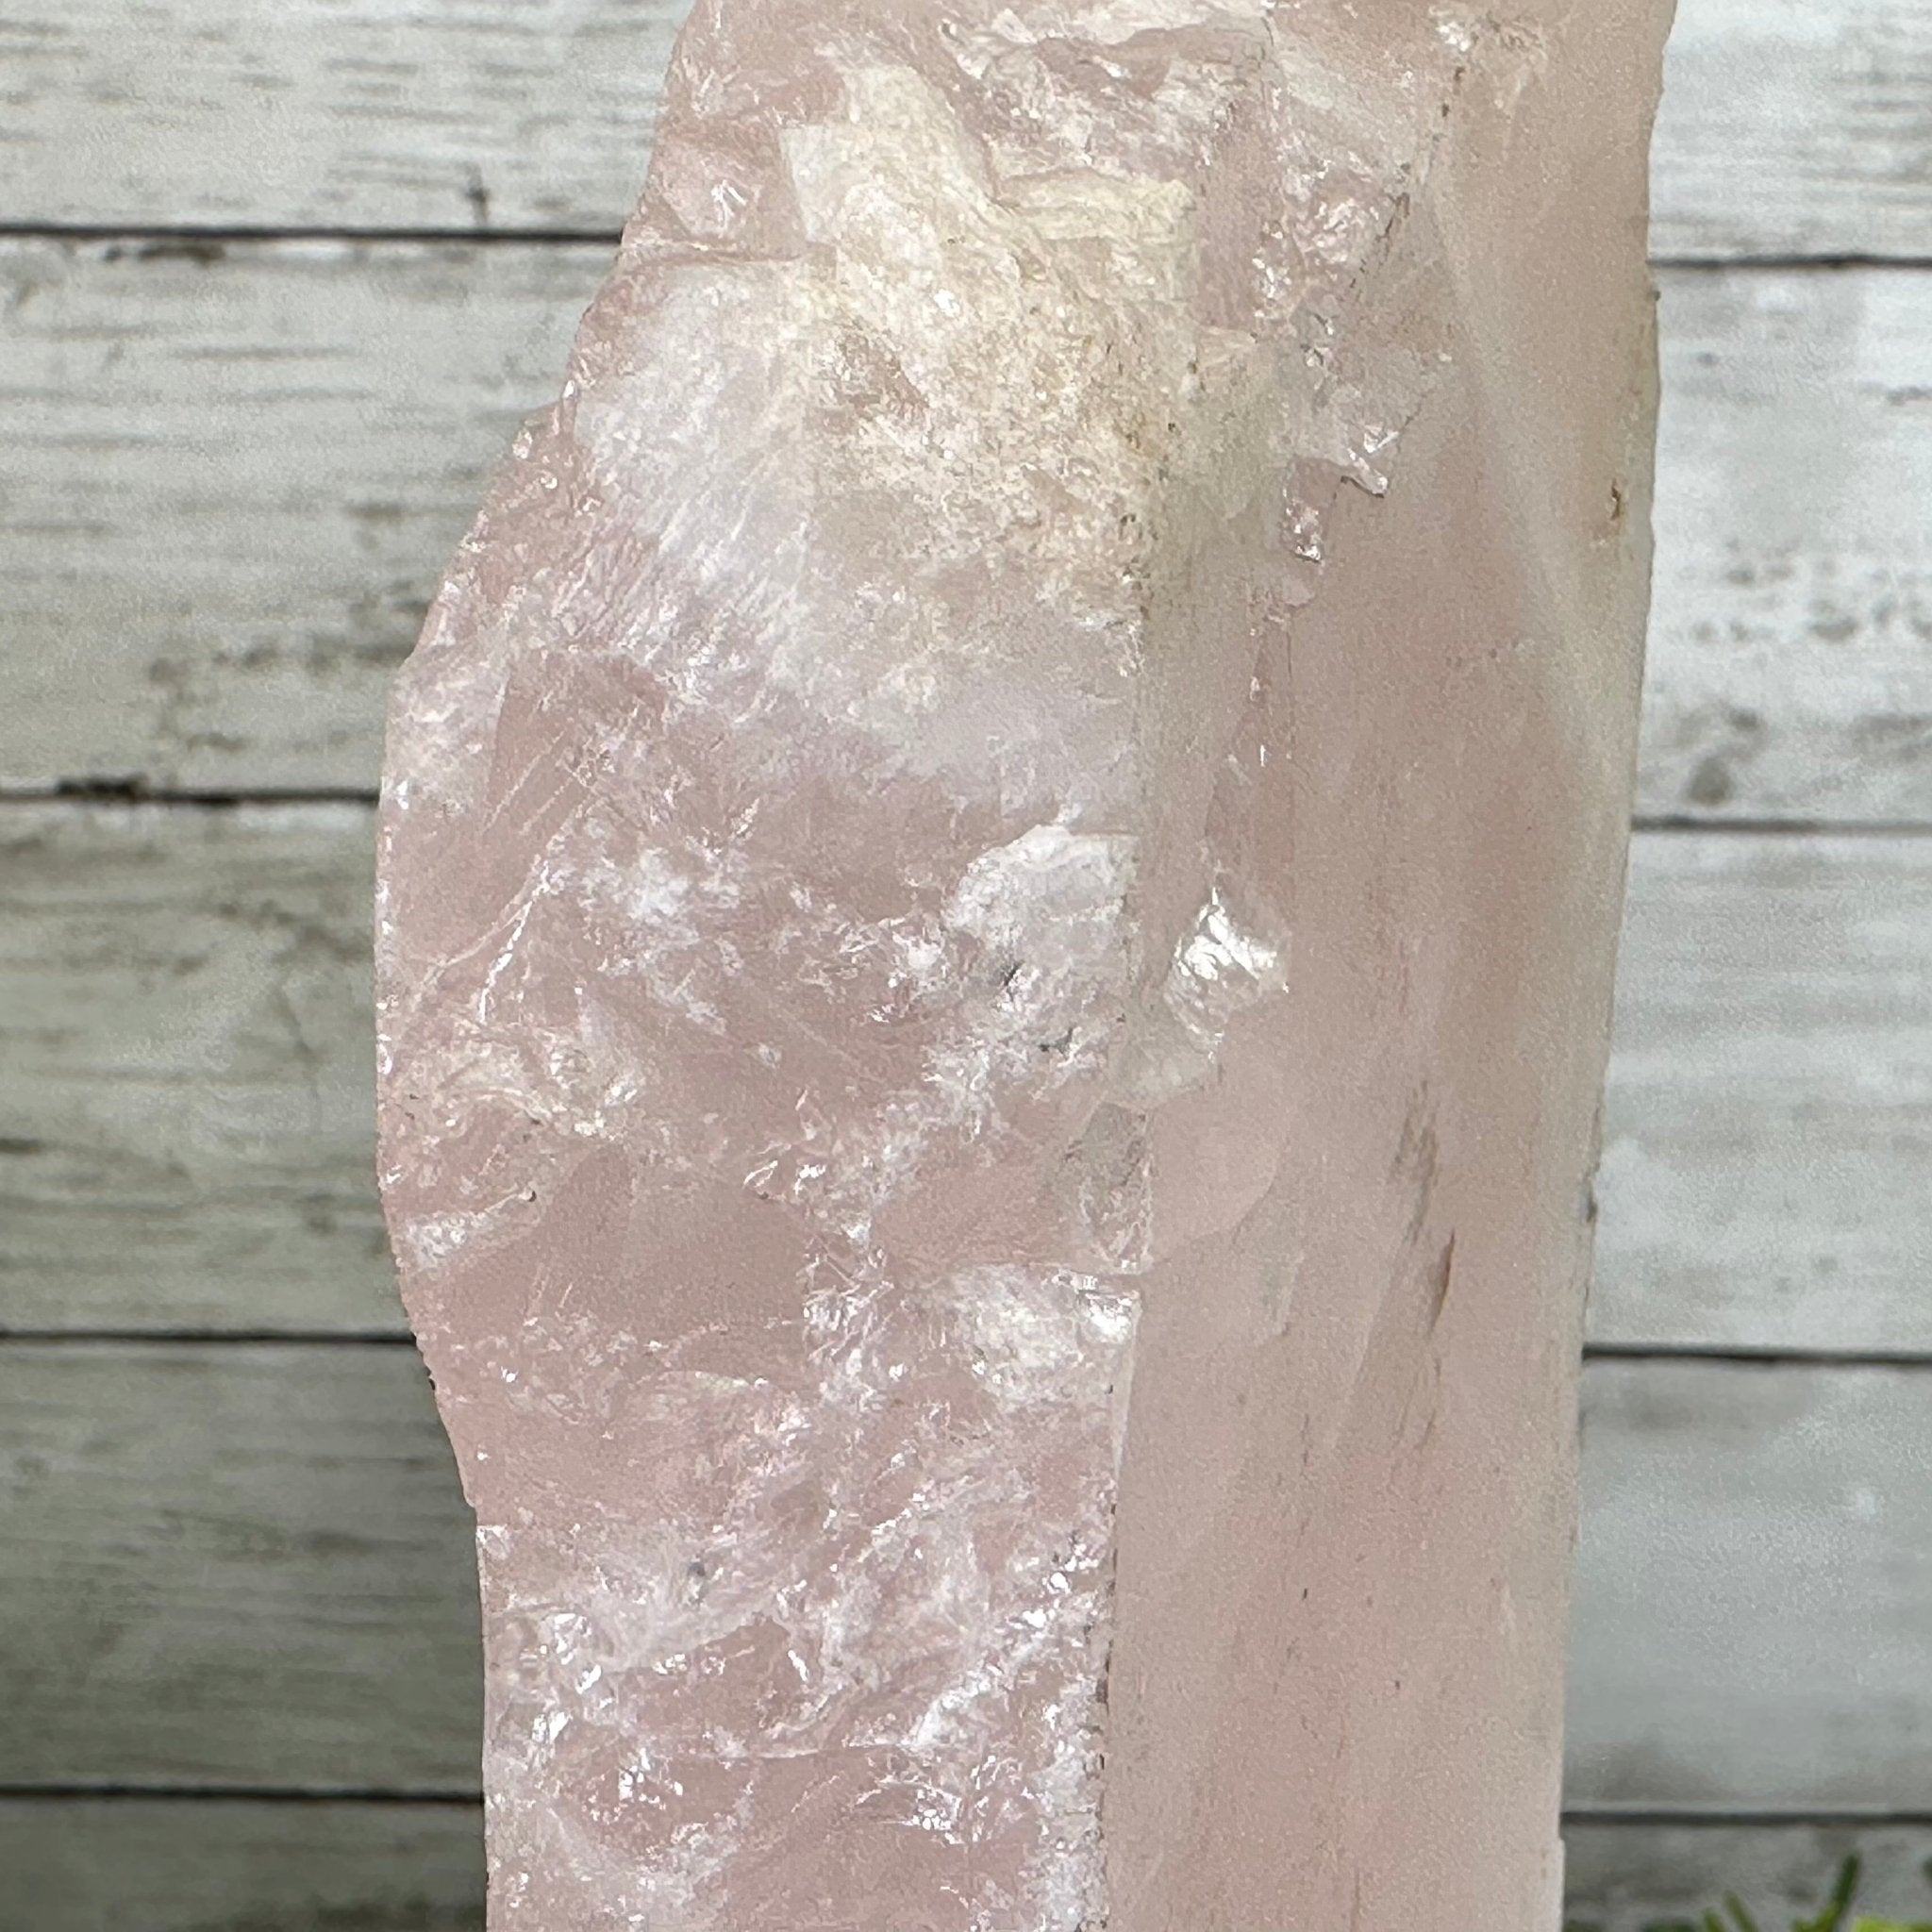 Rose Quartz Polished Slice with Rough Edges on a Wood Base Model 9.25" Tall Model #6100RQ-009 by Brazil Gems - Brazil GemsBrazil GemsRose Quartz Polished Slice with Rough Edges on a Wood Base Model 9.25" Tall Model #6100RQ-009 by Brazil GemsSlices on Wood Bases6100RQ-009